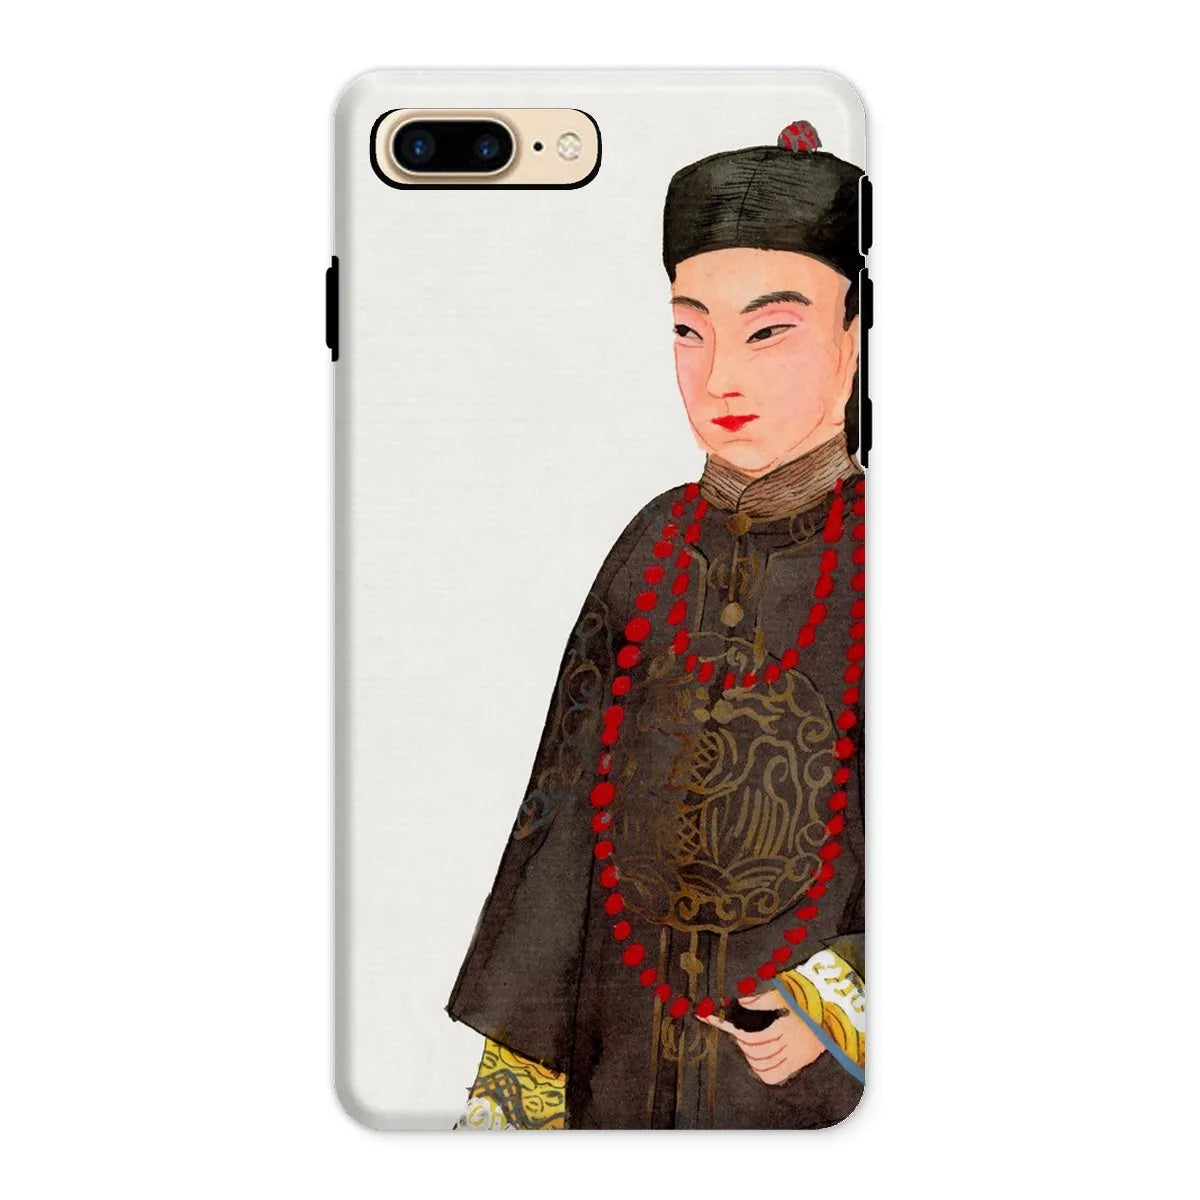 Emperor’s Courtier - Chinese Manchu Aesthetic Art Phone Case - Iphone 8 Plus / Matte - Mobile Phone Cases - Aesthetic